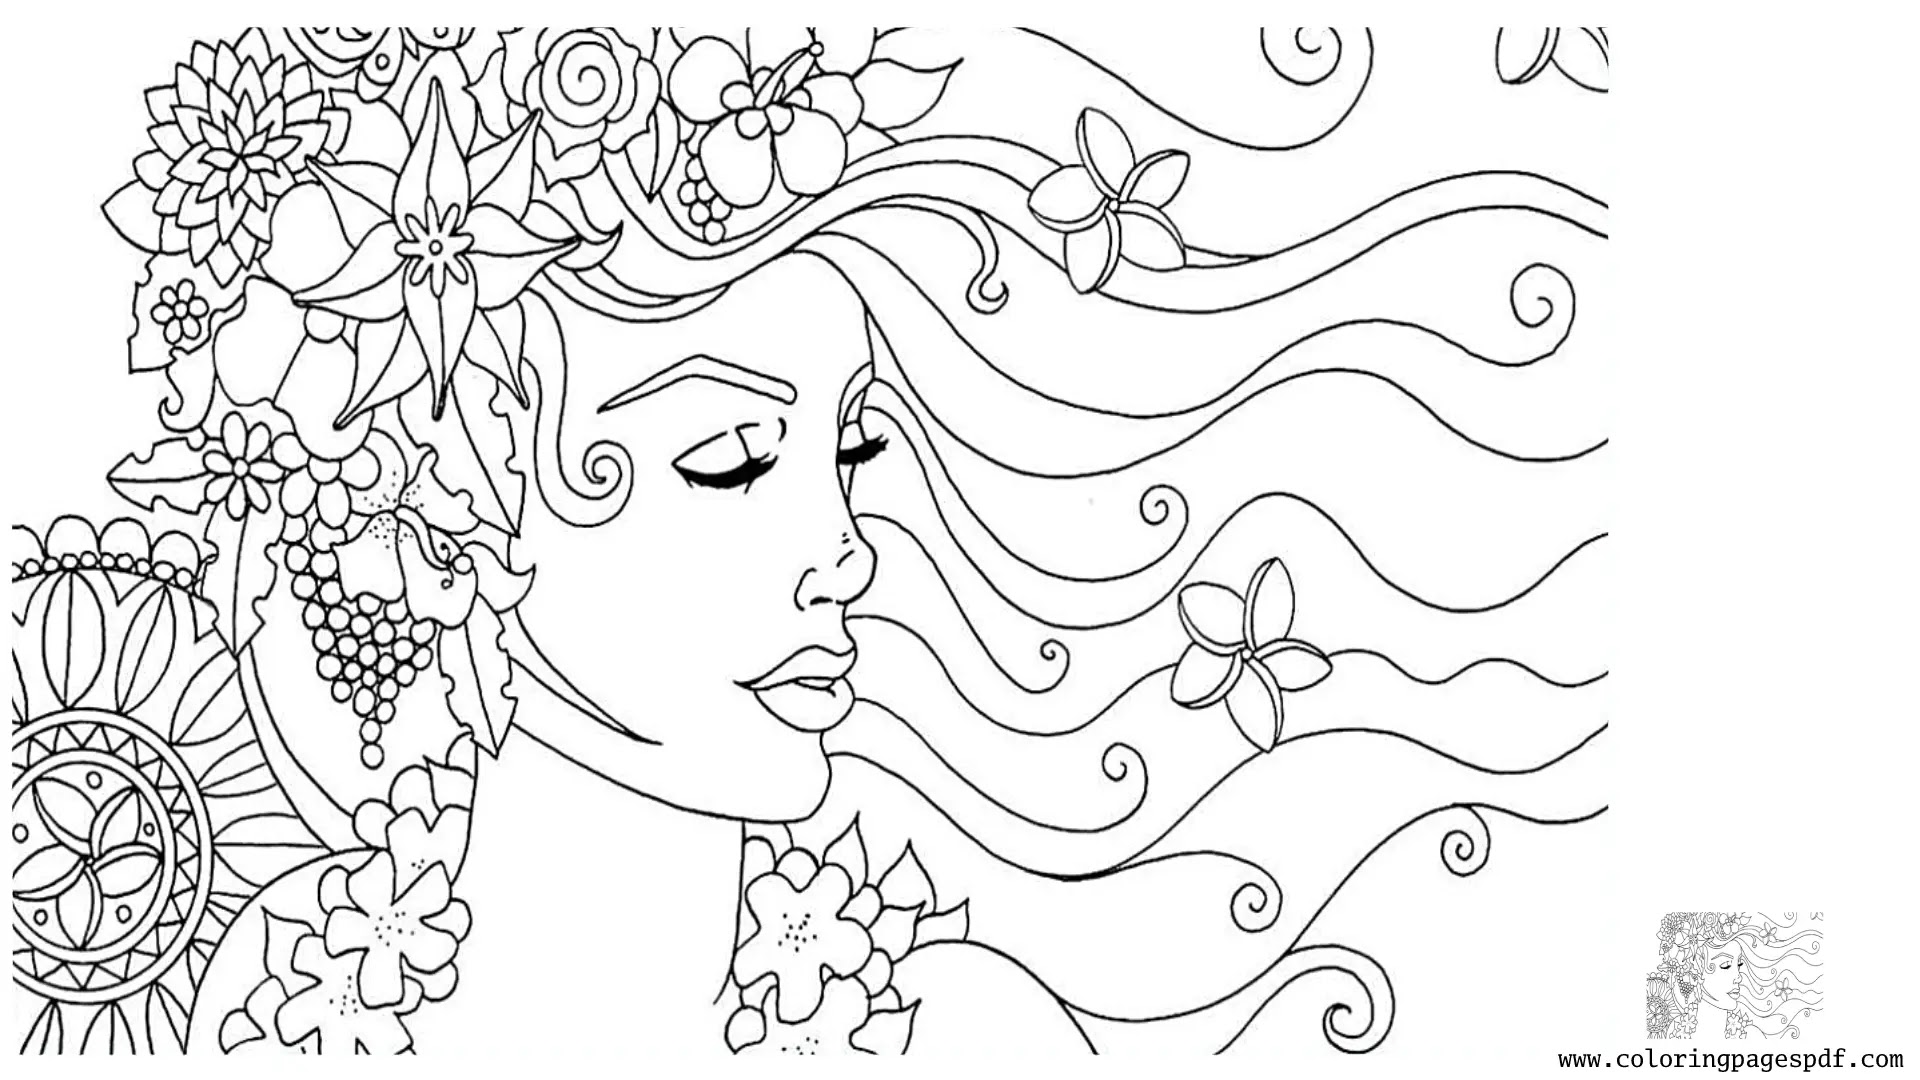 Coloring Pages Of A Woman With Grapes And Flowers On Her Hair